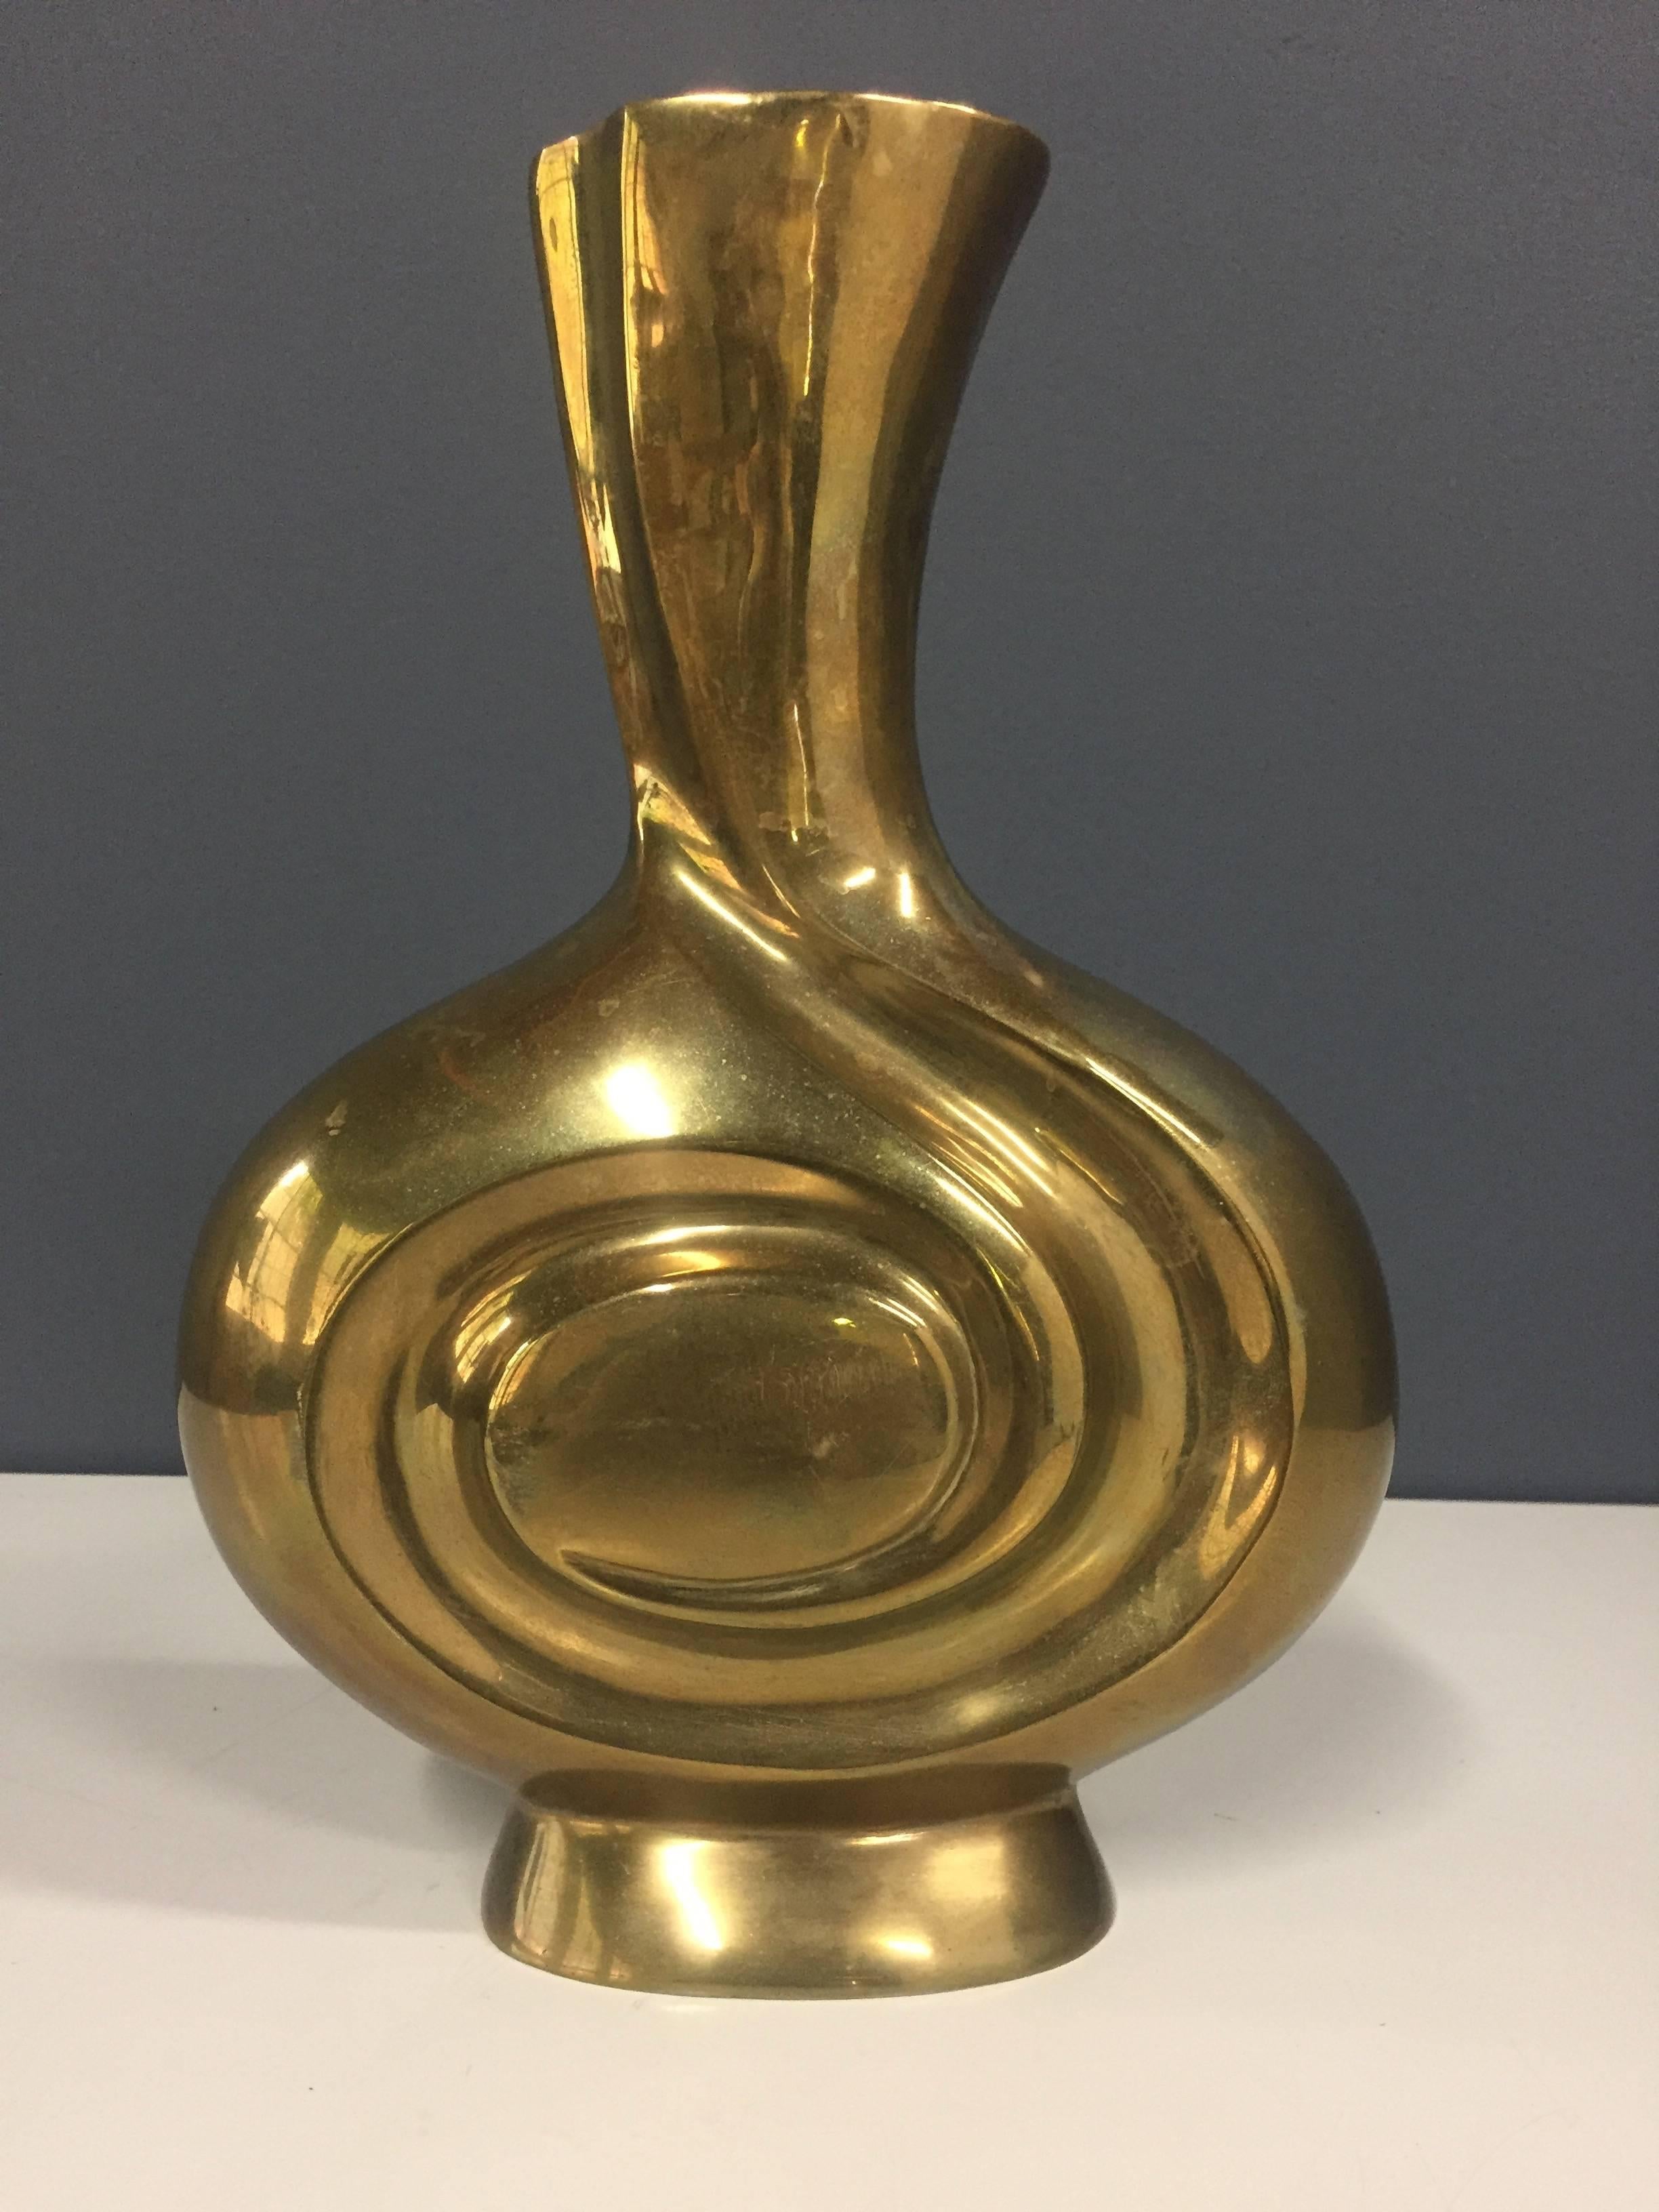 This brass vase, reminiscent of the work of Paloma Picasso is beautifully designed as was much of the work handled by Rosenthal Netter.